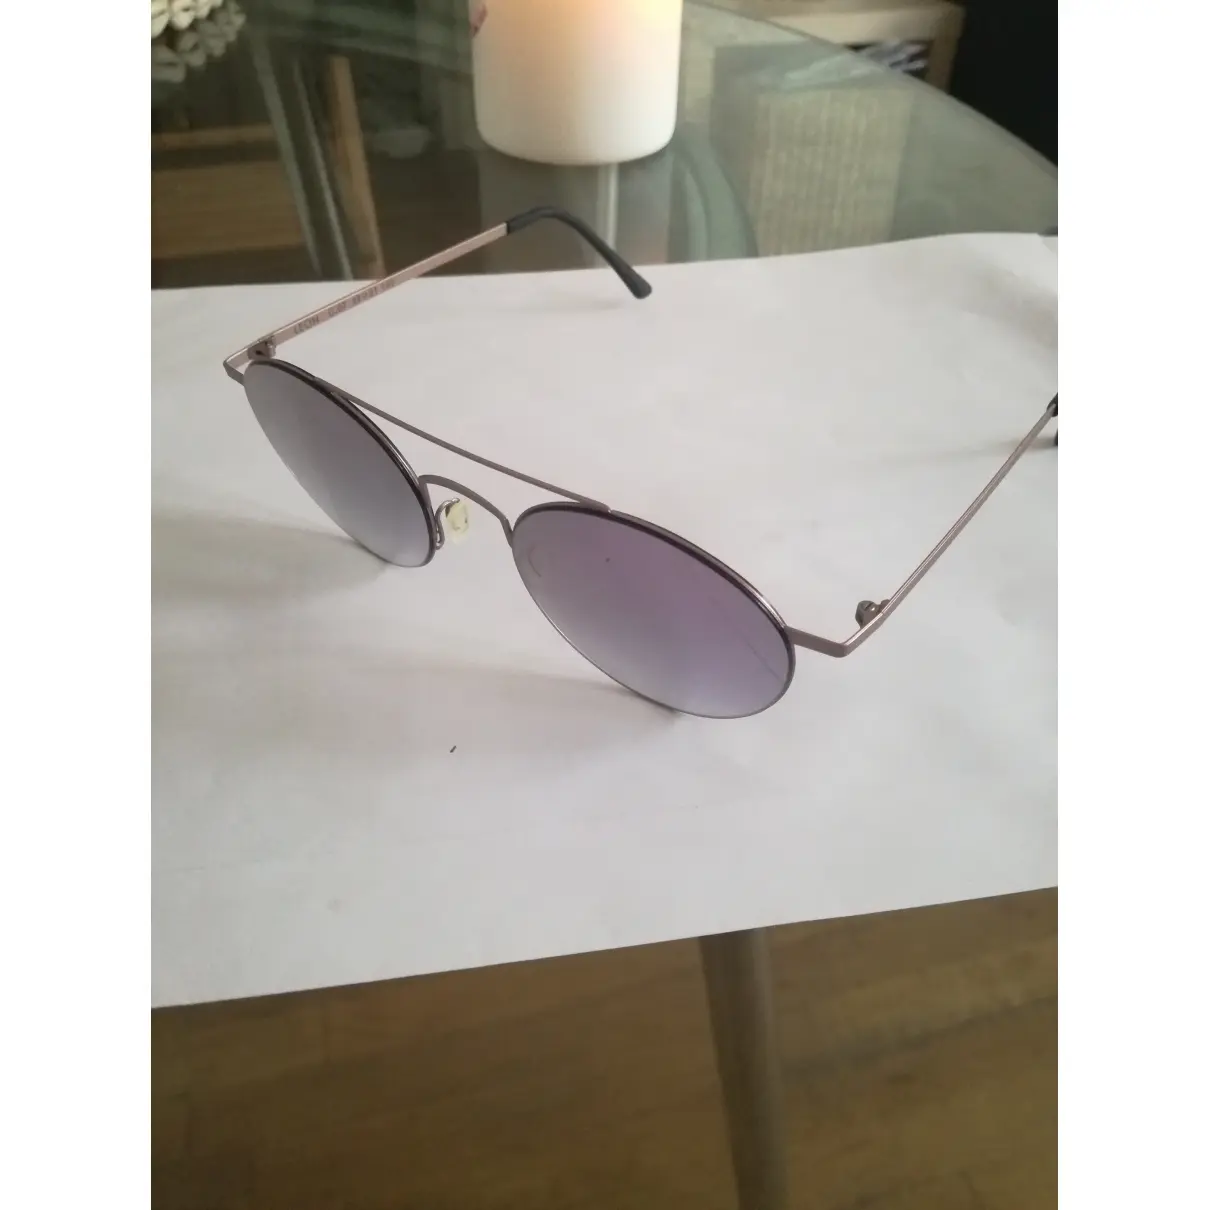 Kyme Sunglasses for sale